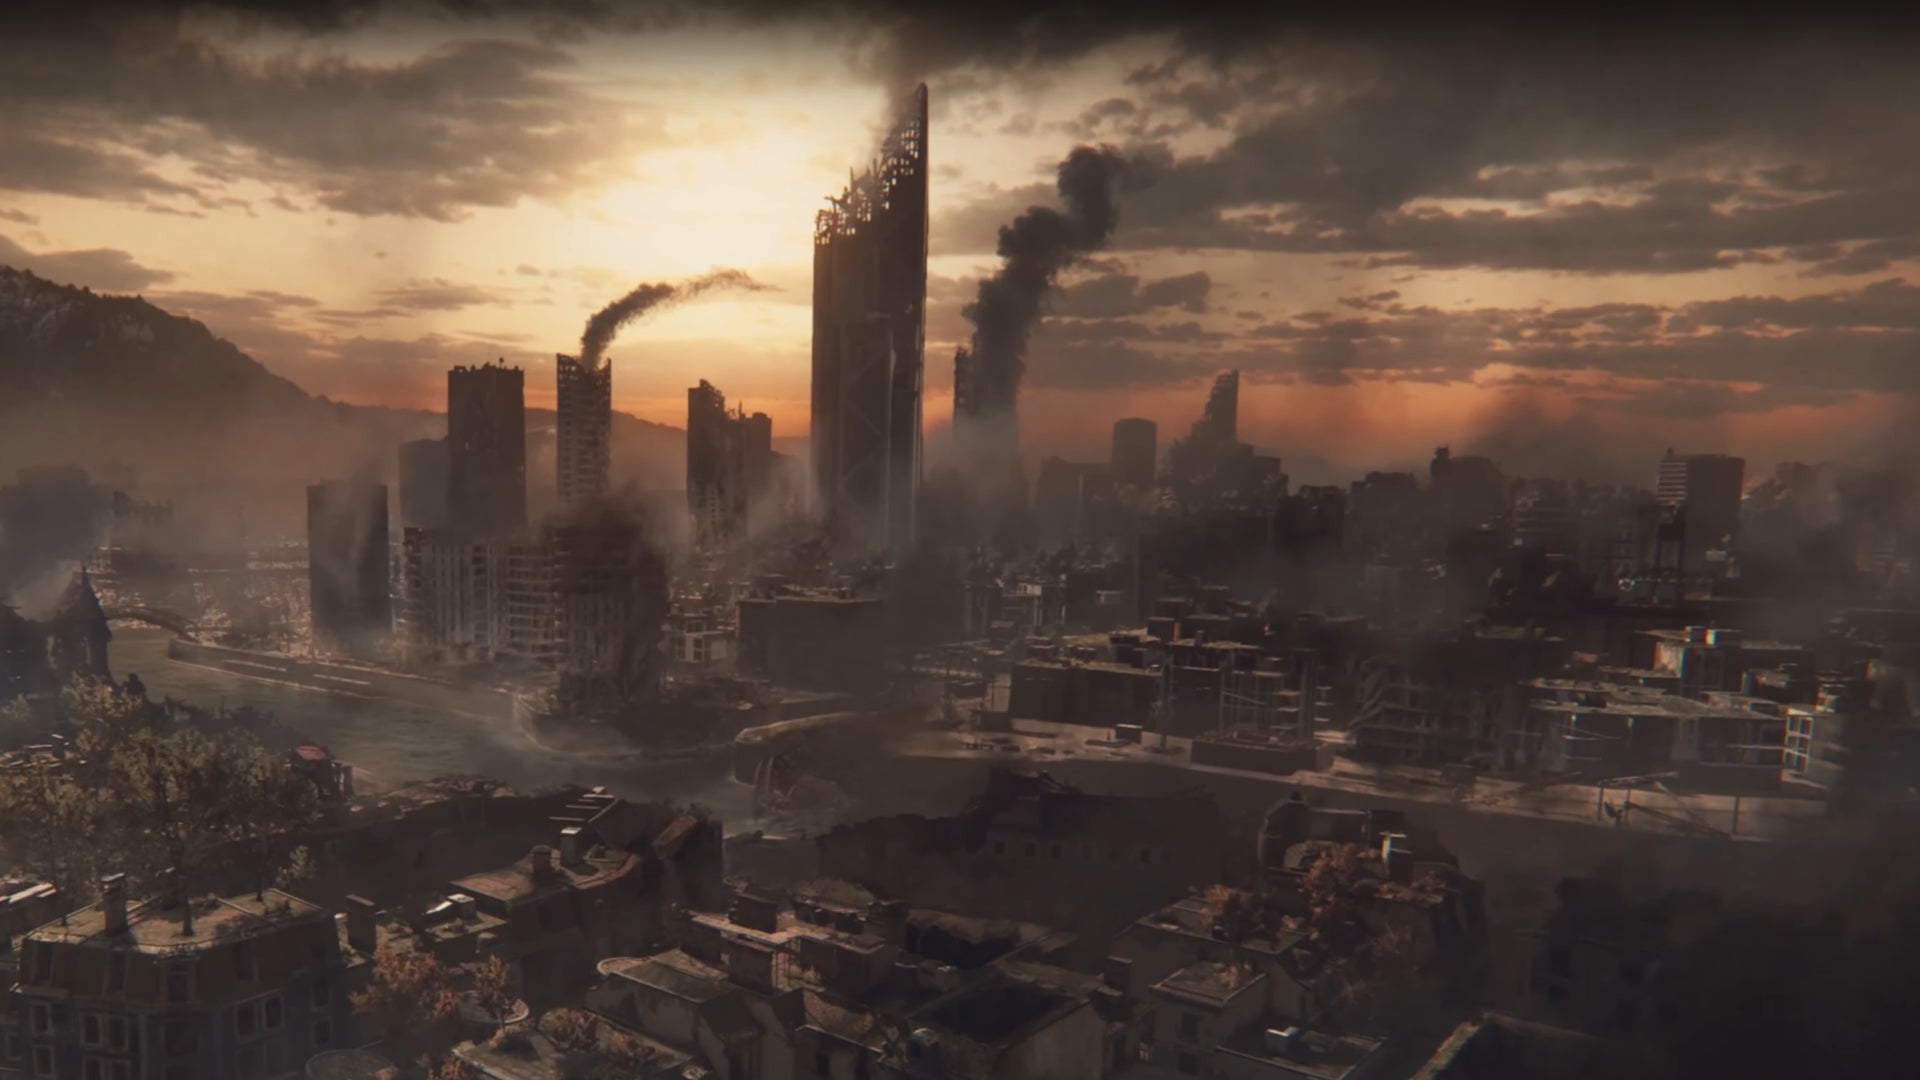 A screenshot from the ending cutscene of Dying Light 2 showing Villedor in ruins.